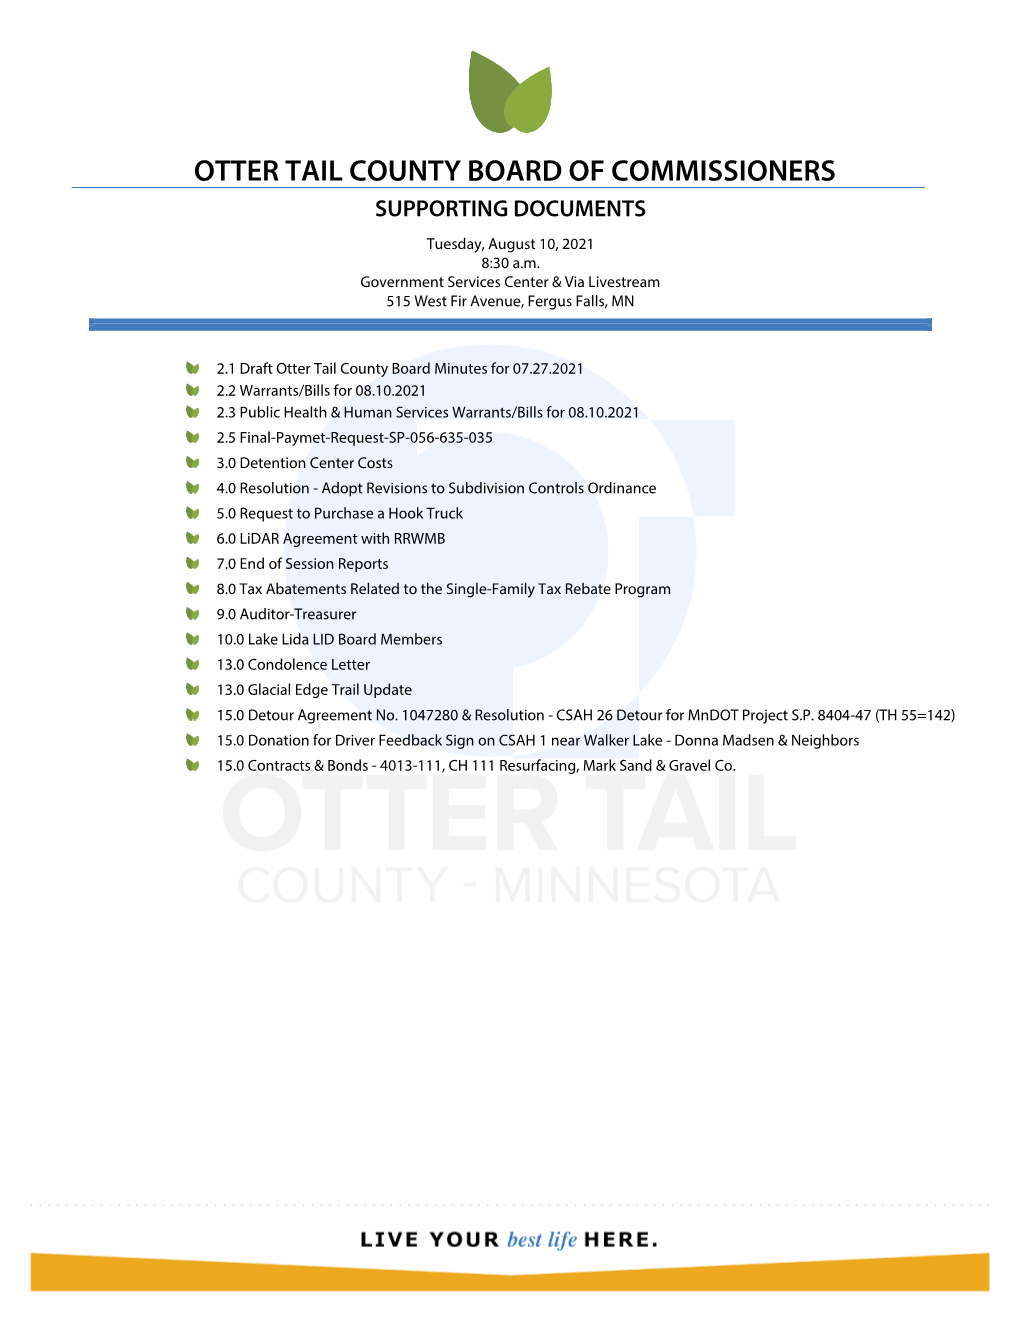 OTTER TAIL COUNTY BOARD of COMMISSIONERS SUPPORTING DOCUMENTS Tuesday, August 10, 2021 8:30 A.M